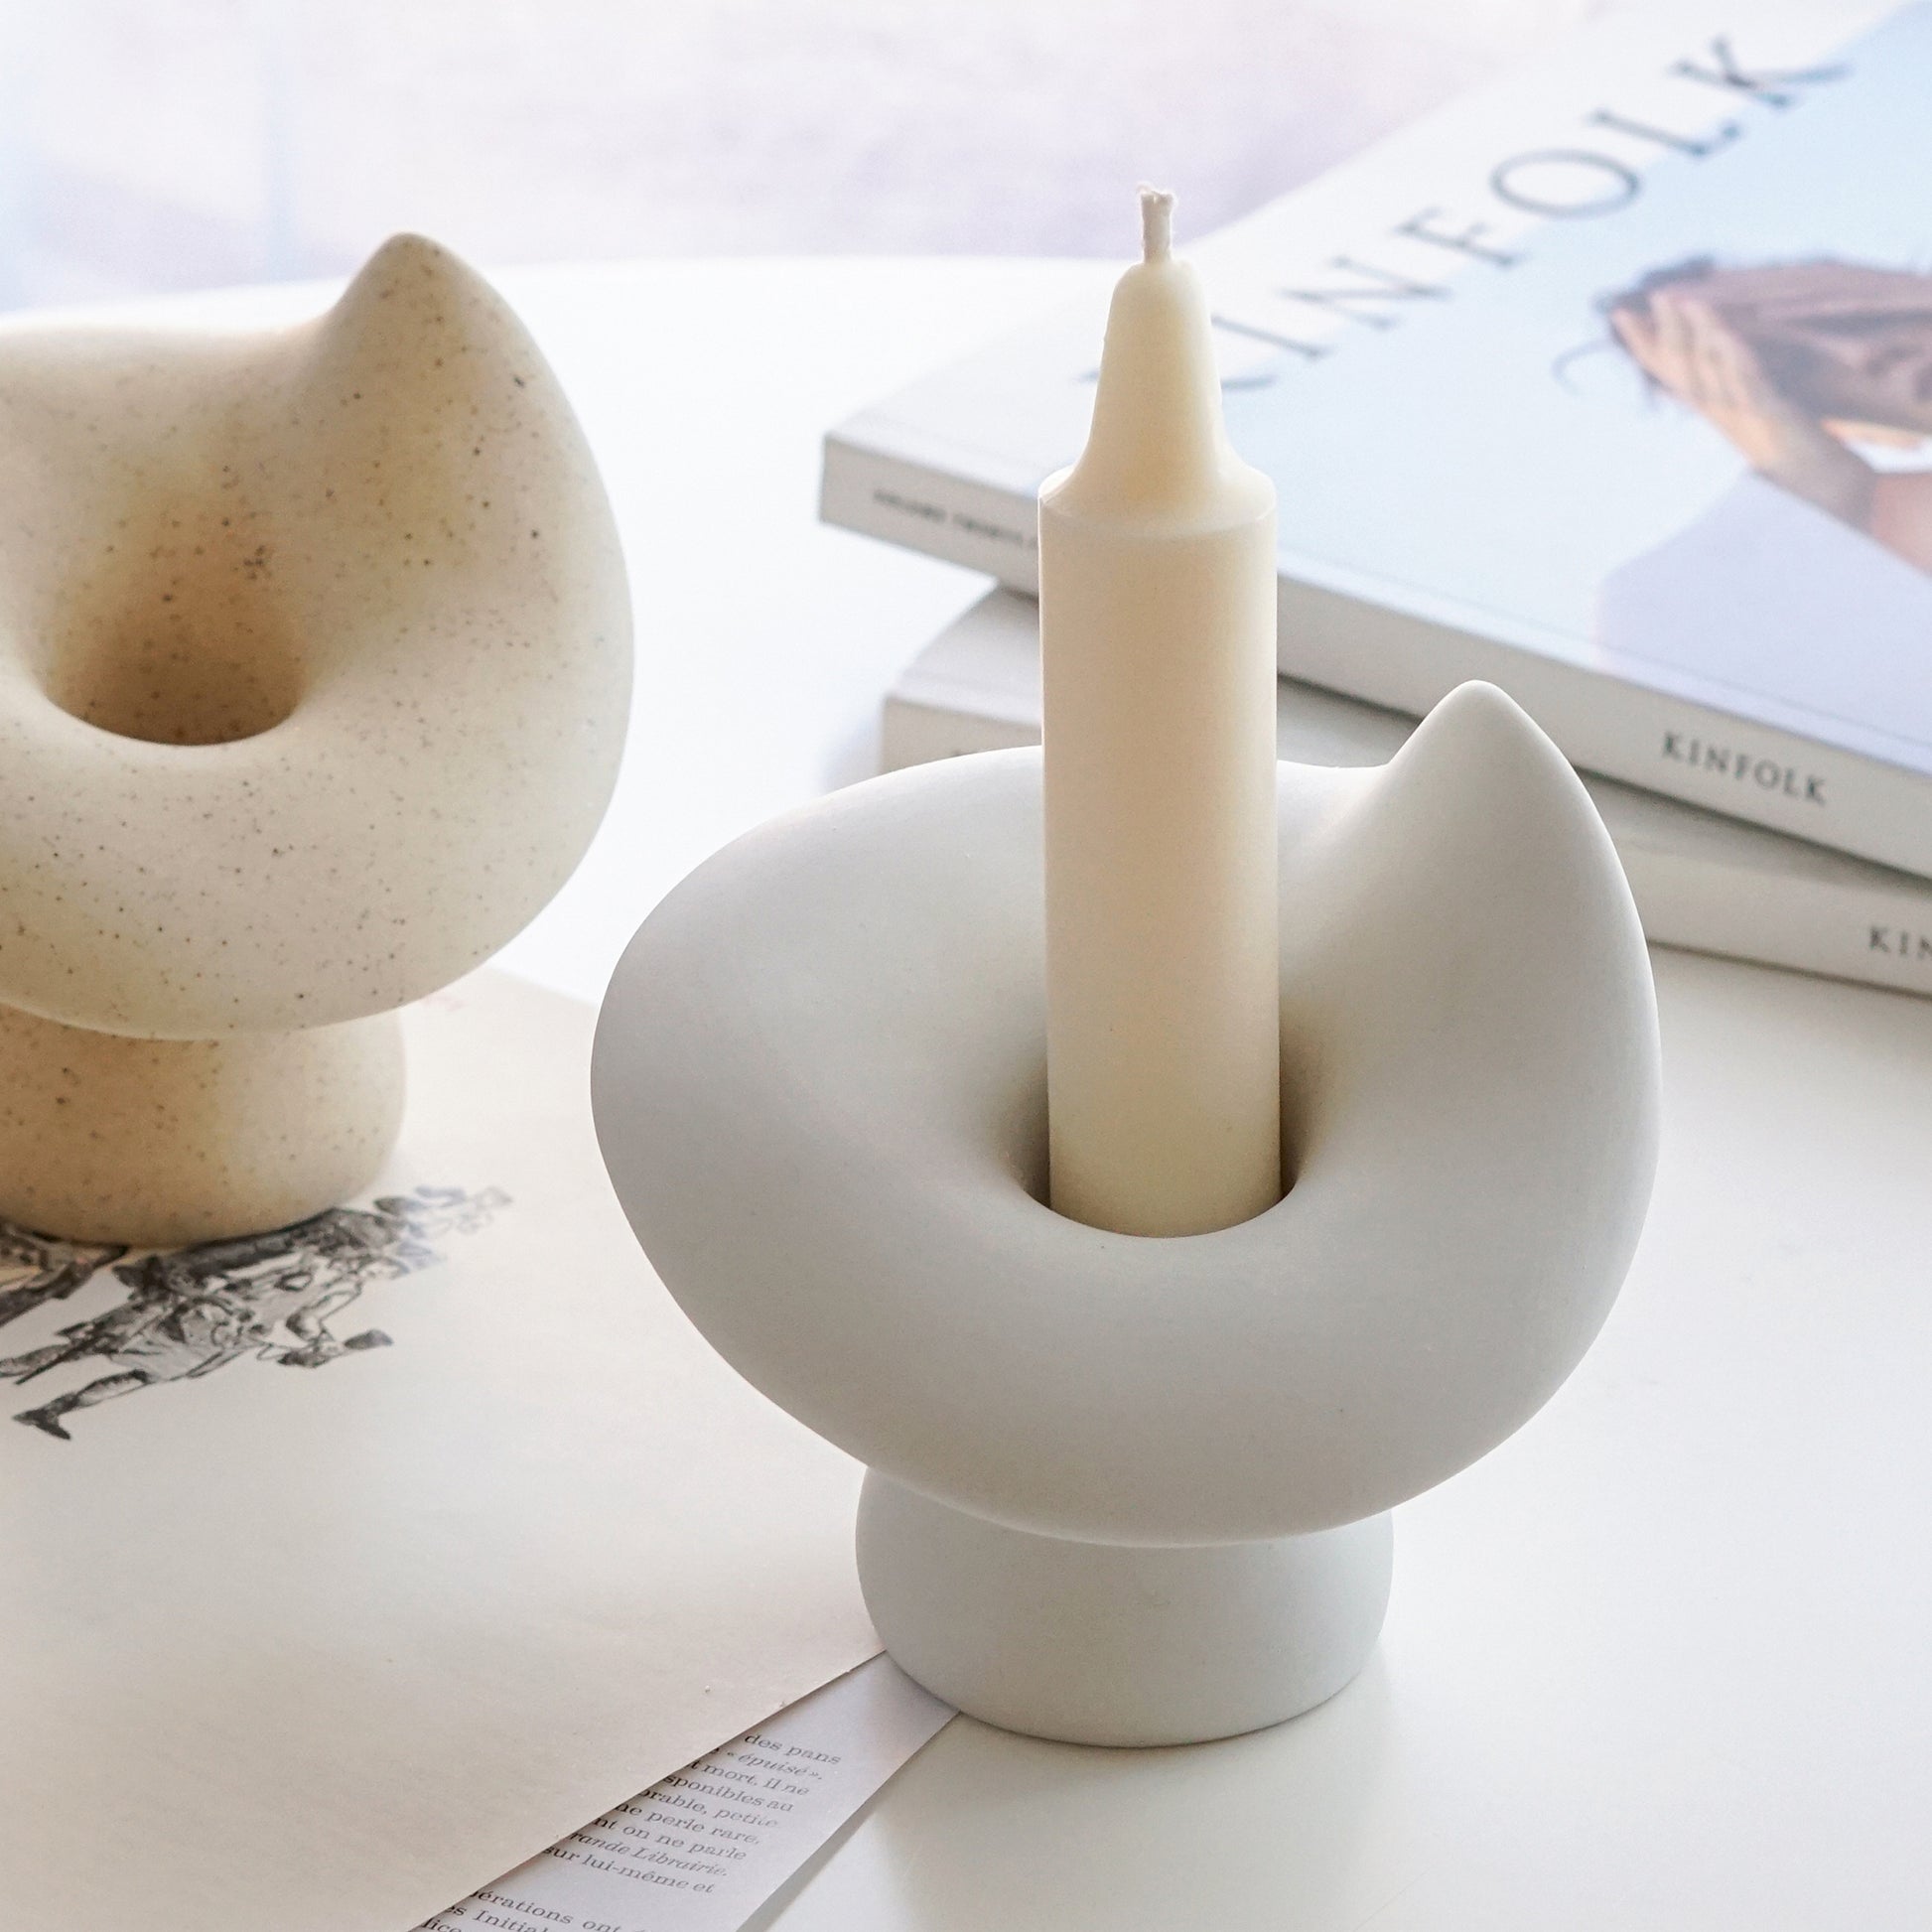 crayon white soy pillar taper candle in a white mushroom ceramic candle holder, a dotted yellow mushroom candle holder, and kinfolk magazines